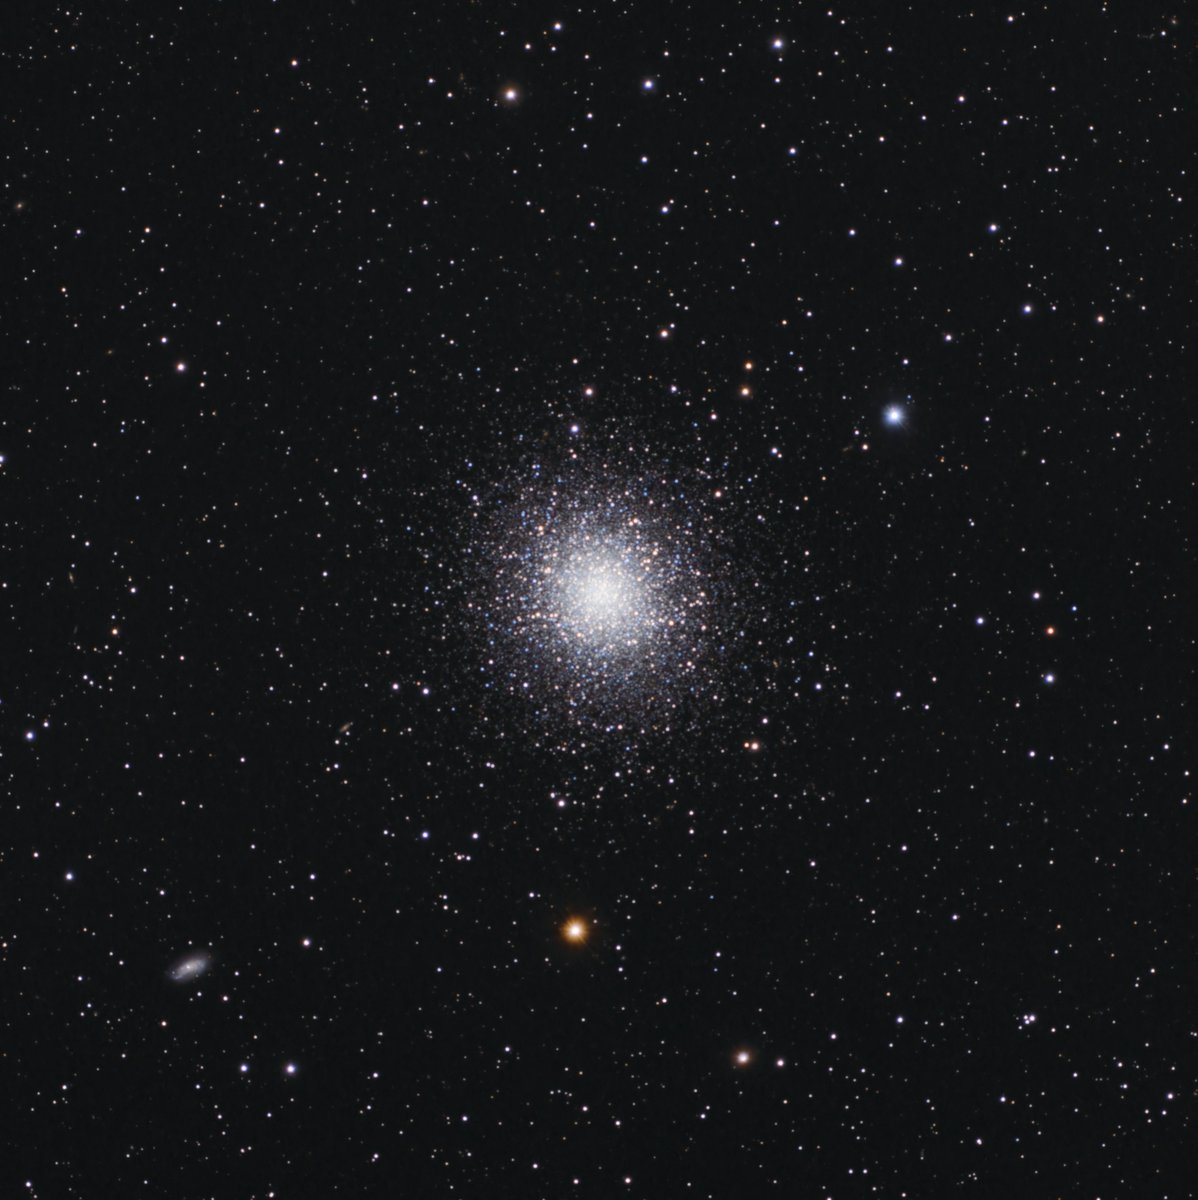 Here's M13 from the Bootleg Astronomy 2023 Spring Star Party. A fun night under the stars for sure! Image details on Telescopius or Astrobin. Thanks for looking and Clear Skies!
TS APO 90/600
EQ6-R Pro
ZWO 533MC Pro
Baader M&S LP 48 x 120s

 #astrophotography #astronomy #space